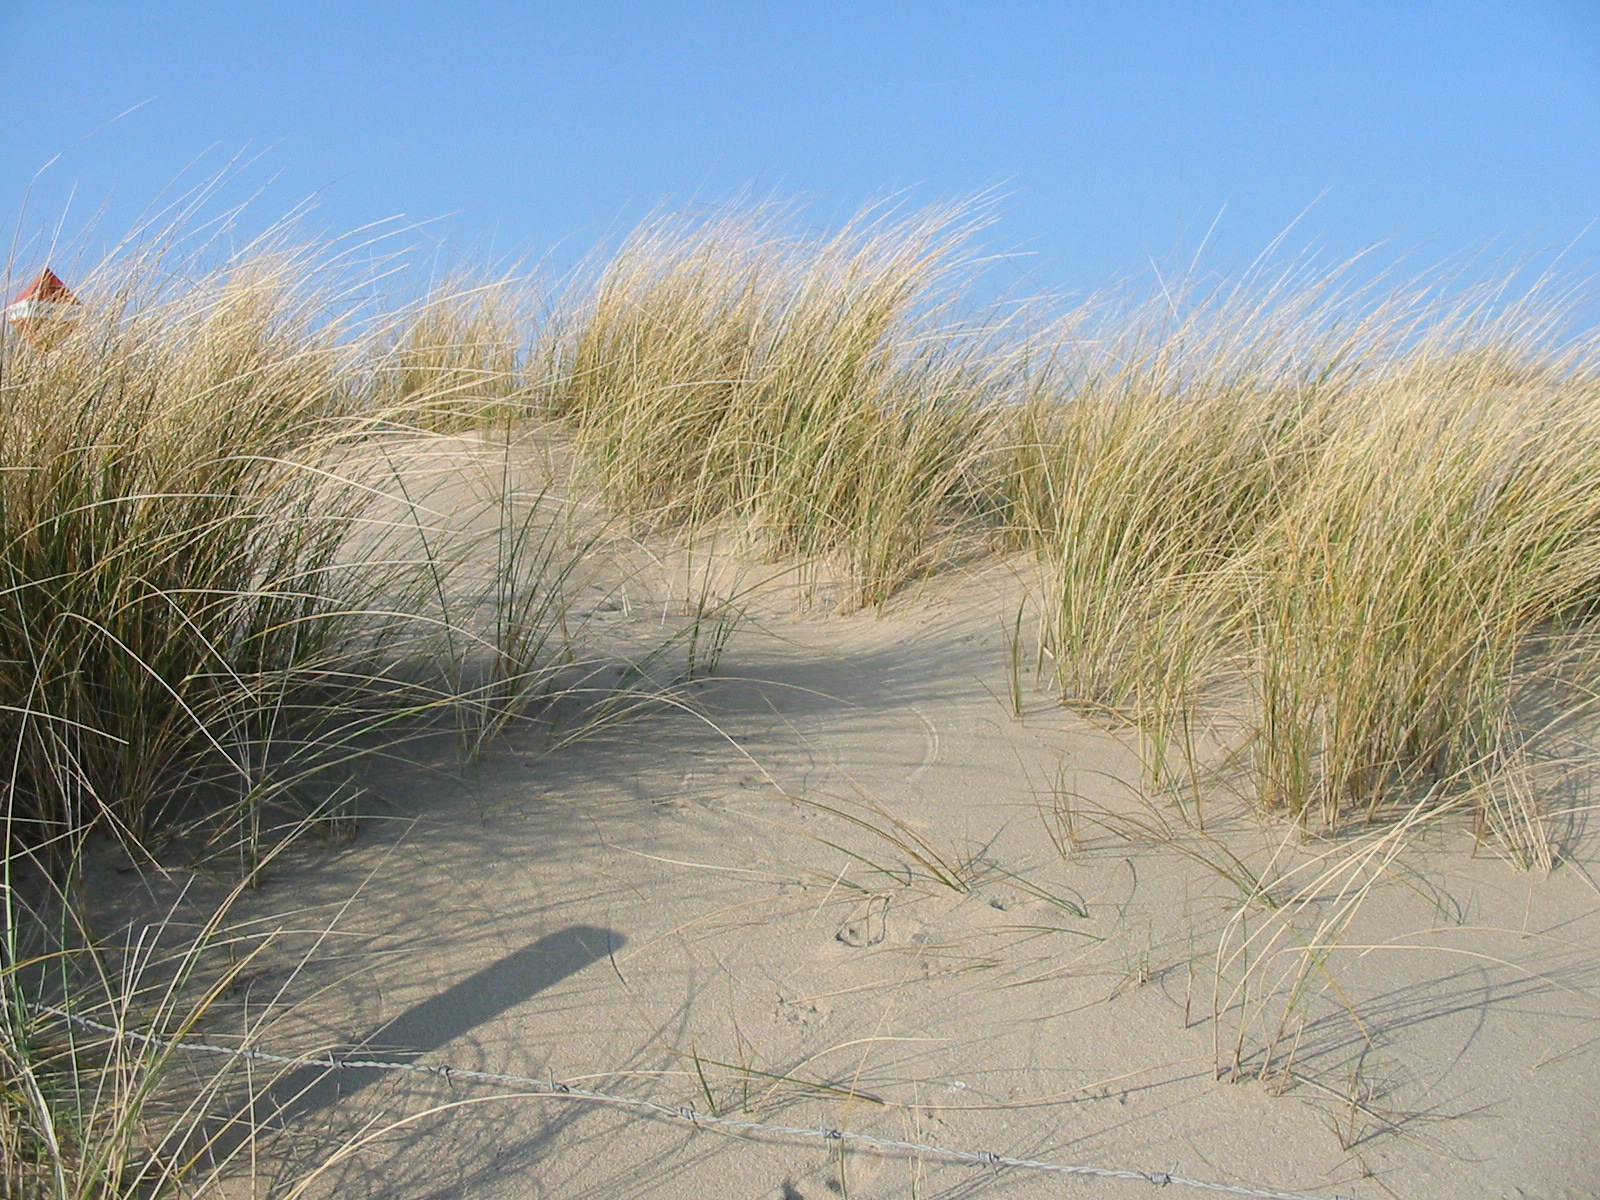 Image of a sand dune